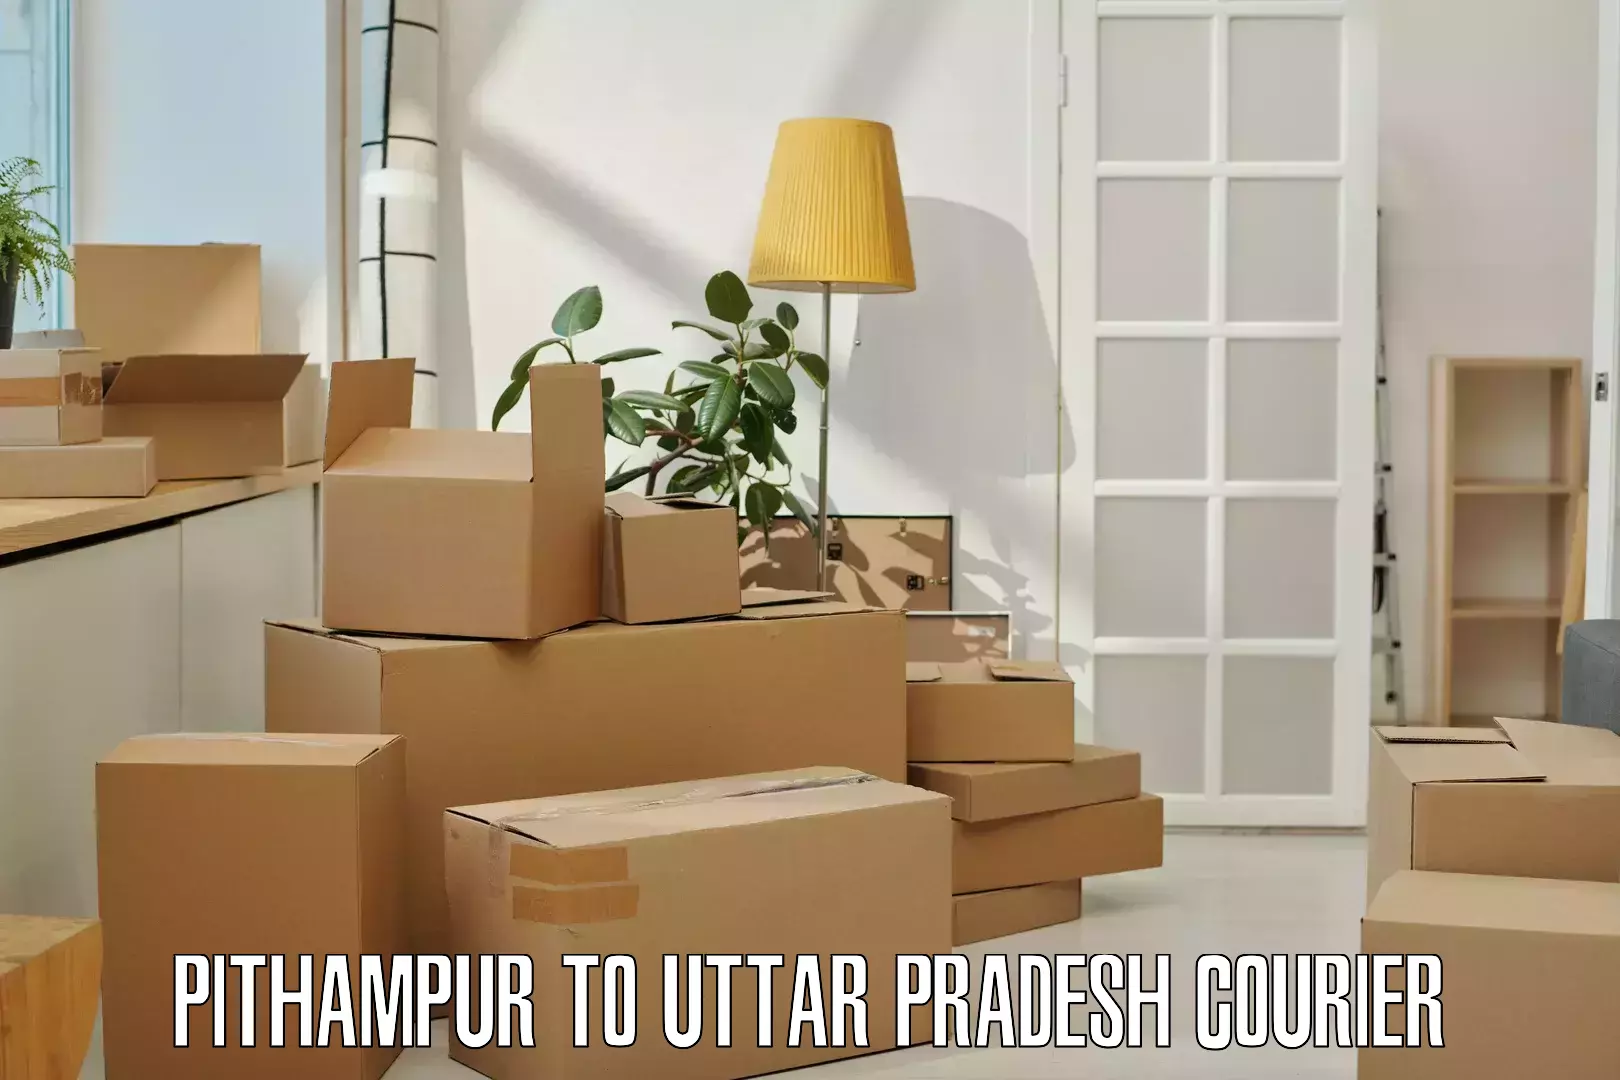 User-friendly delivery service Pithampur to Nautanwa